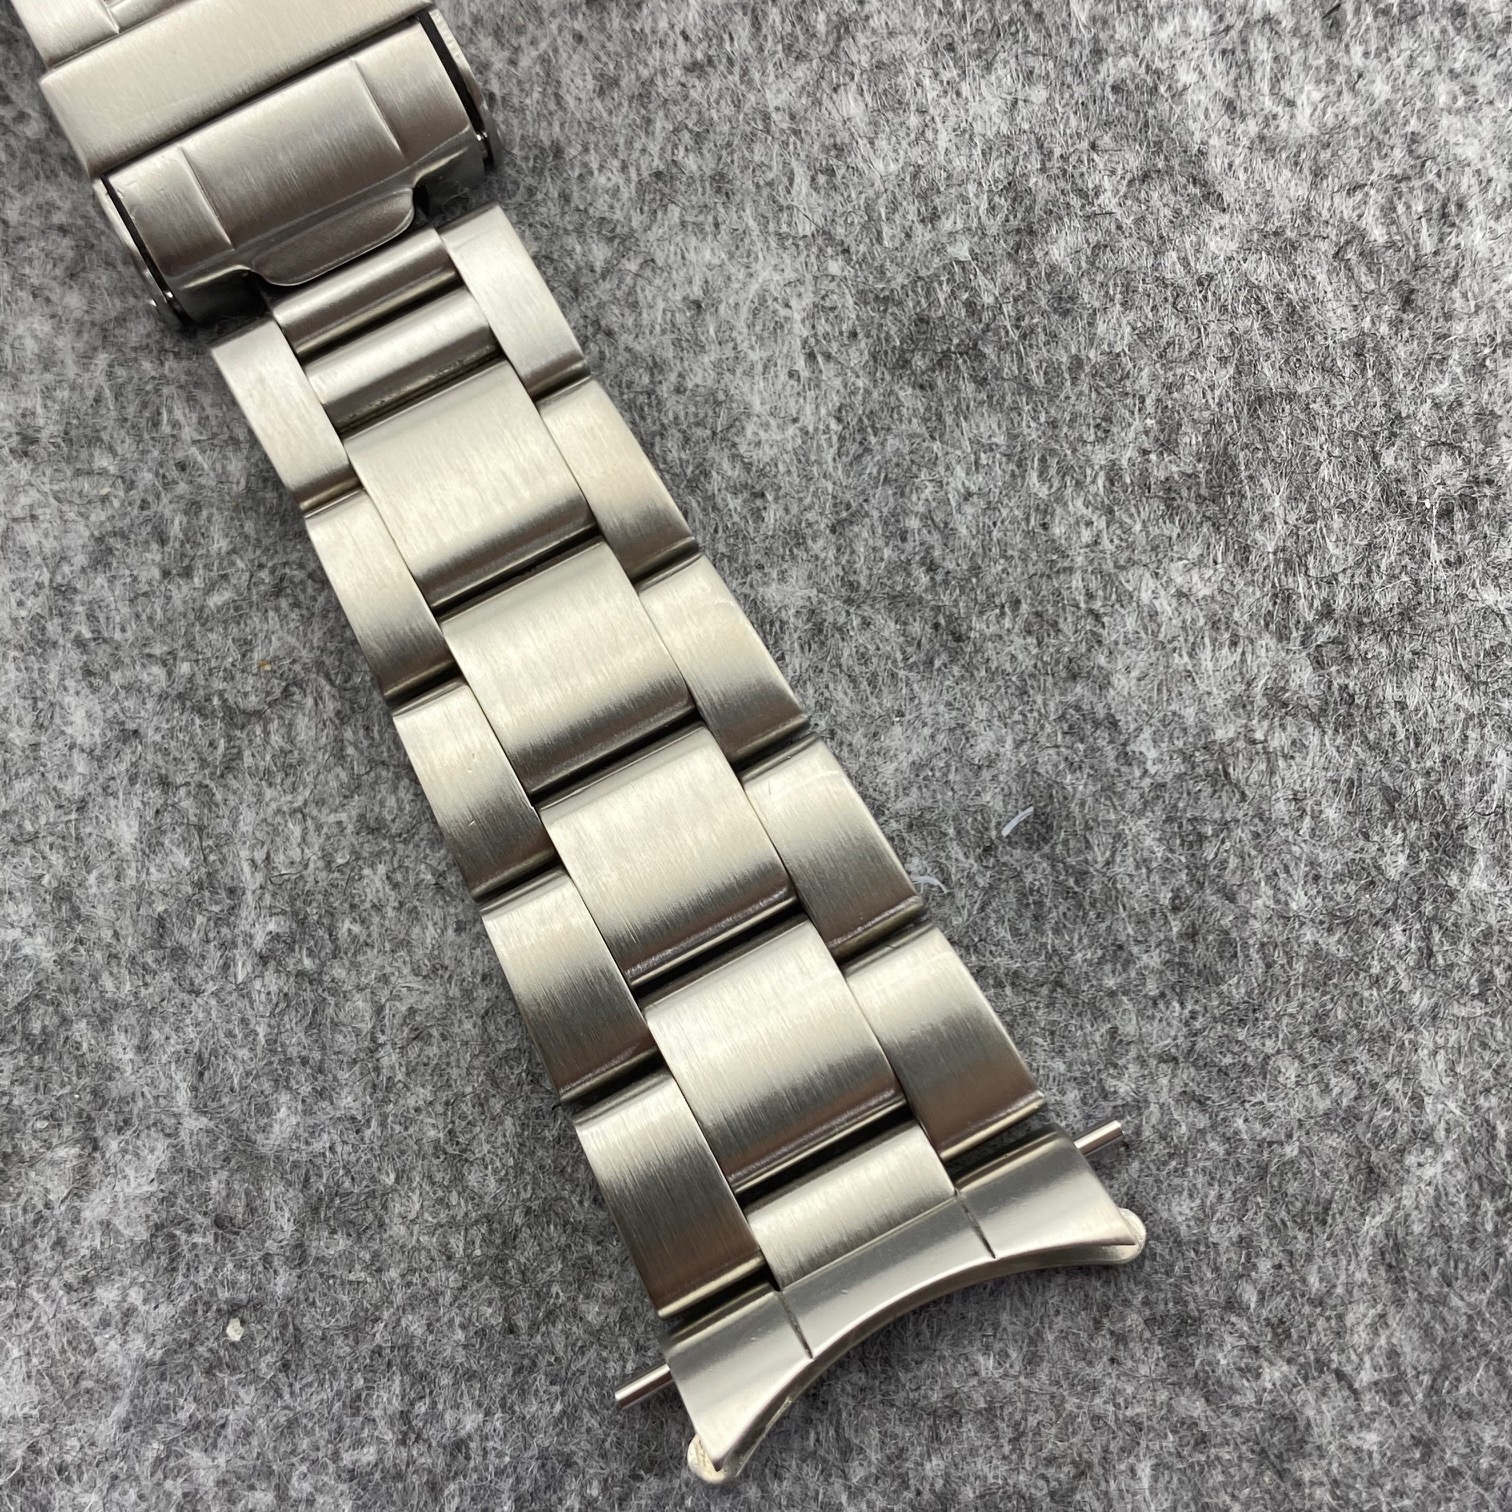 Rare PERFECT UNPOLISHED 1978 Rolex Submariner Oyster Bracelet heavy links  93150, 5513 5512 1680 1665 code clasp VC